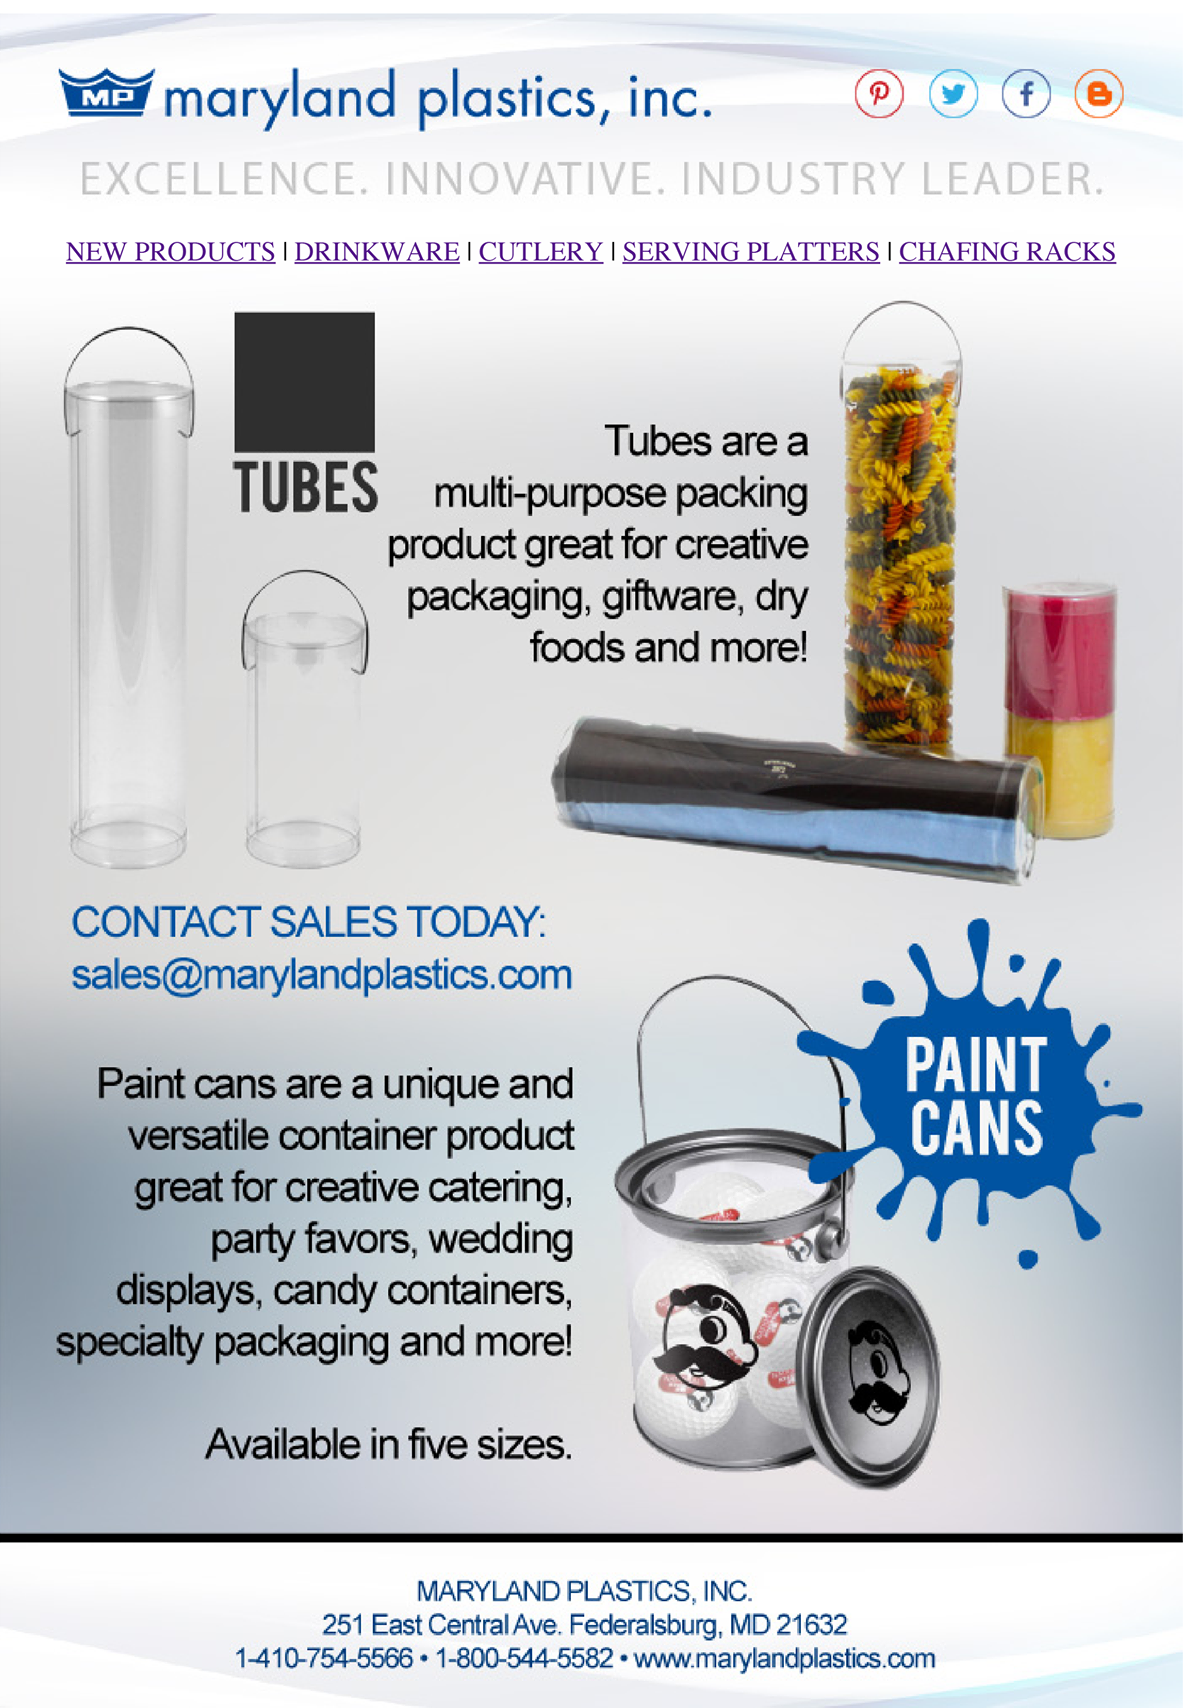 Paint Cans & Tubes from Maryland Plastics